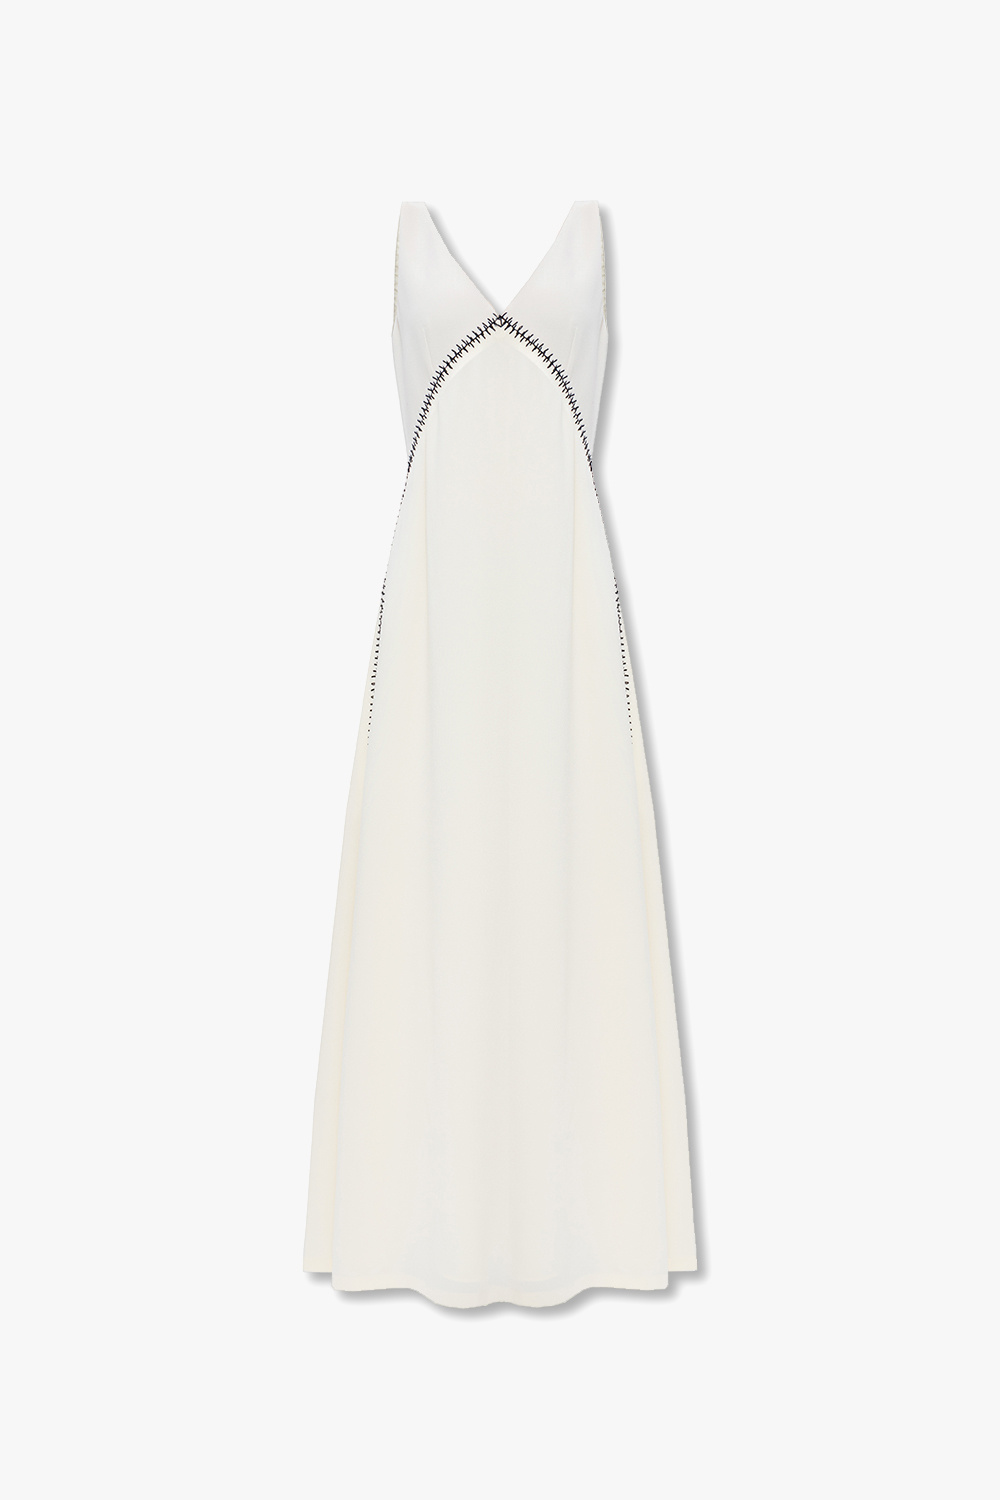 Chloé Maxi dress with stitching details